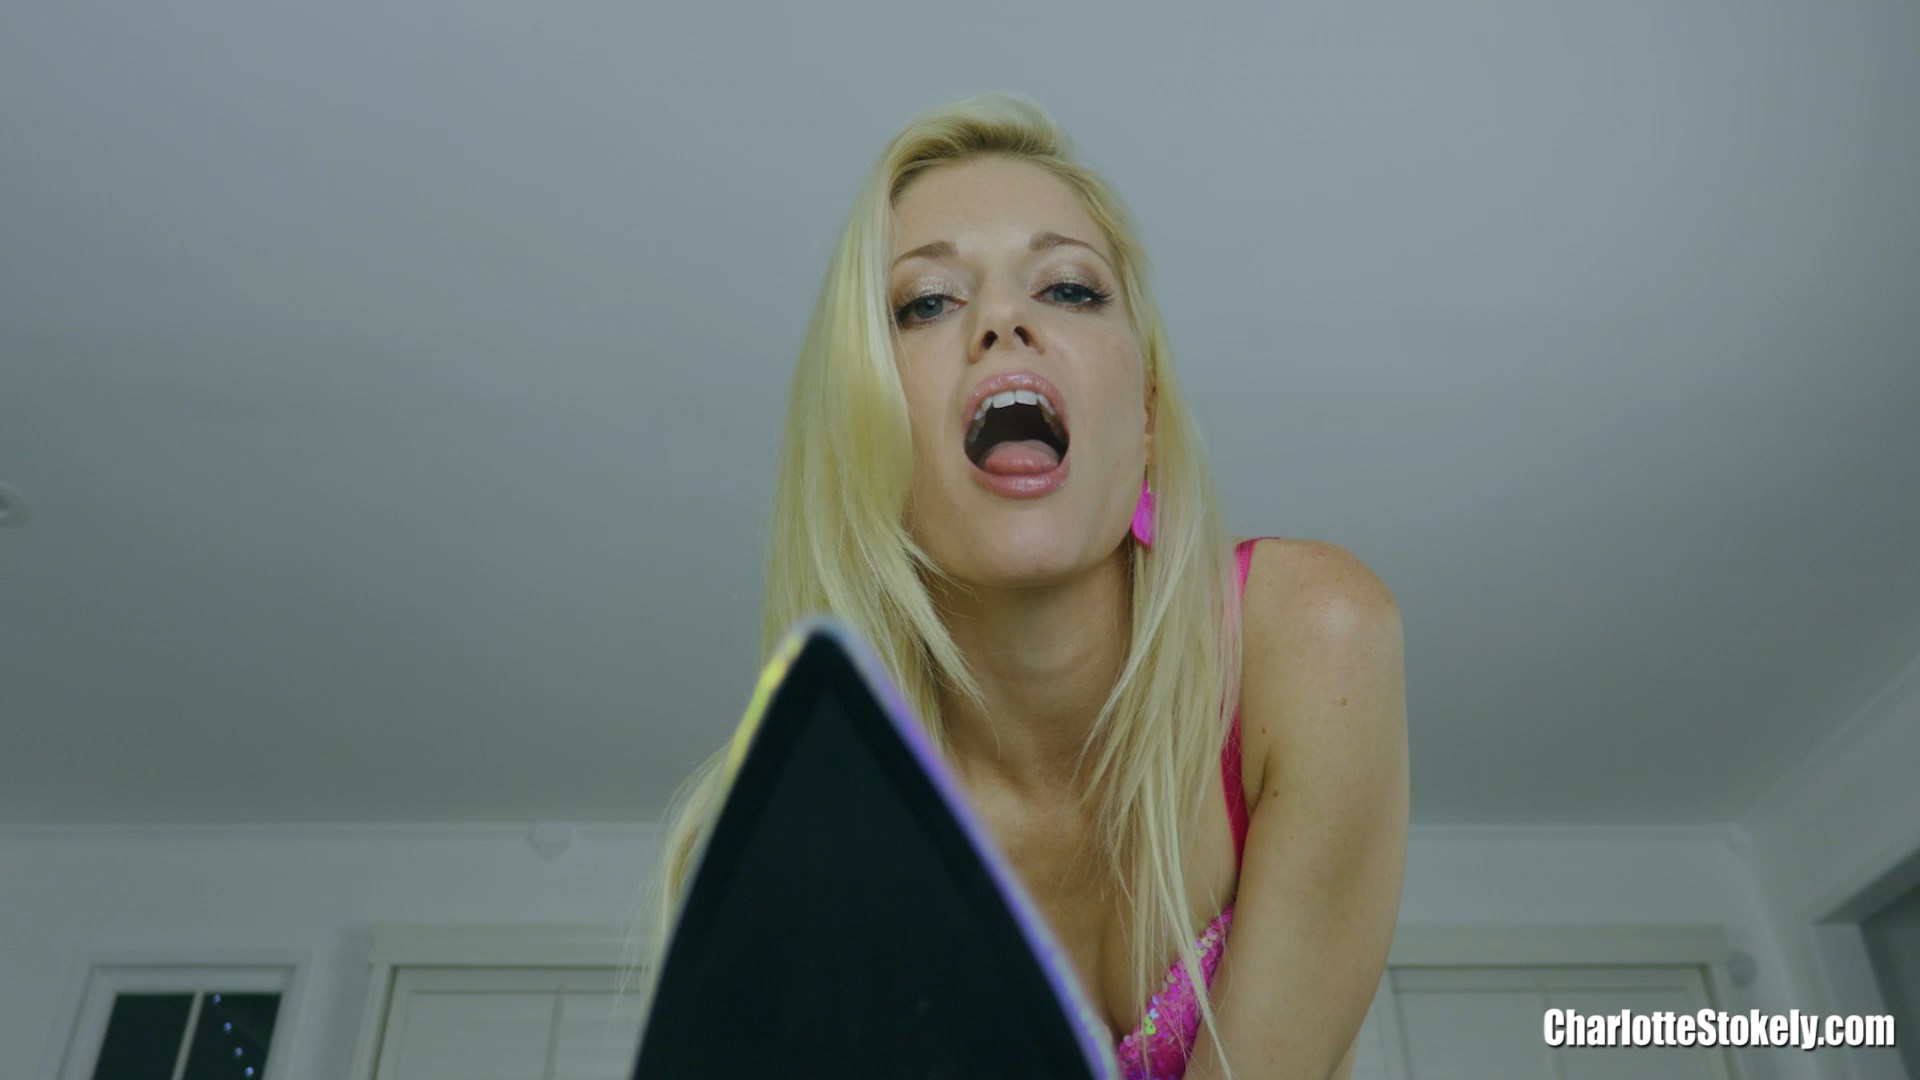 Lick 5 Pairs 1080p - Charlotte Stokely